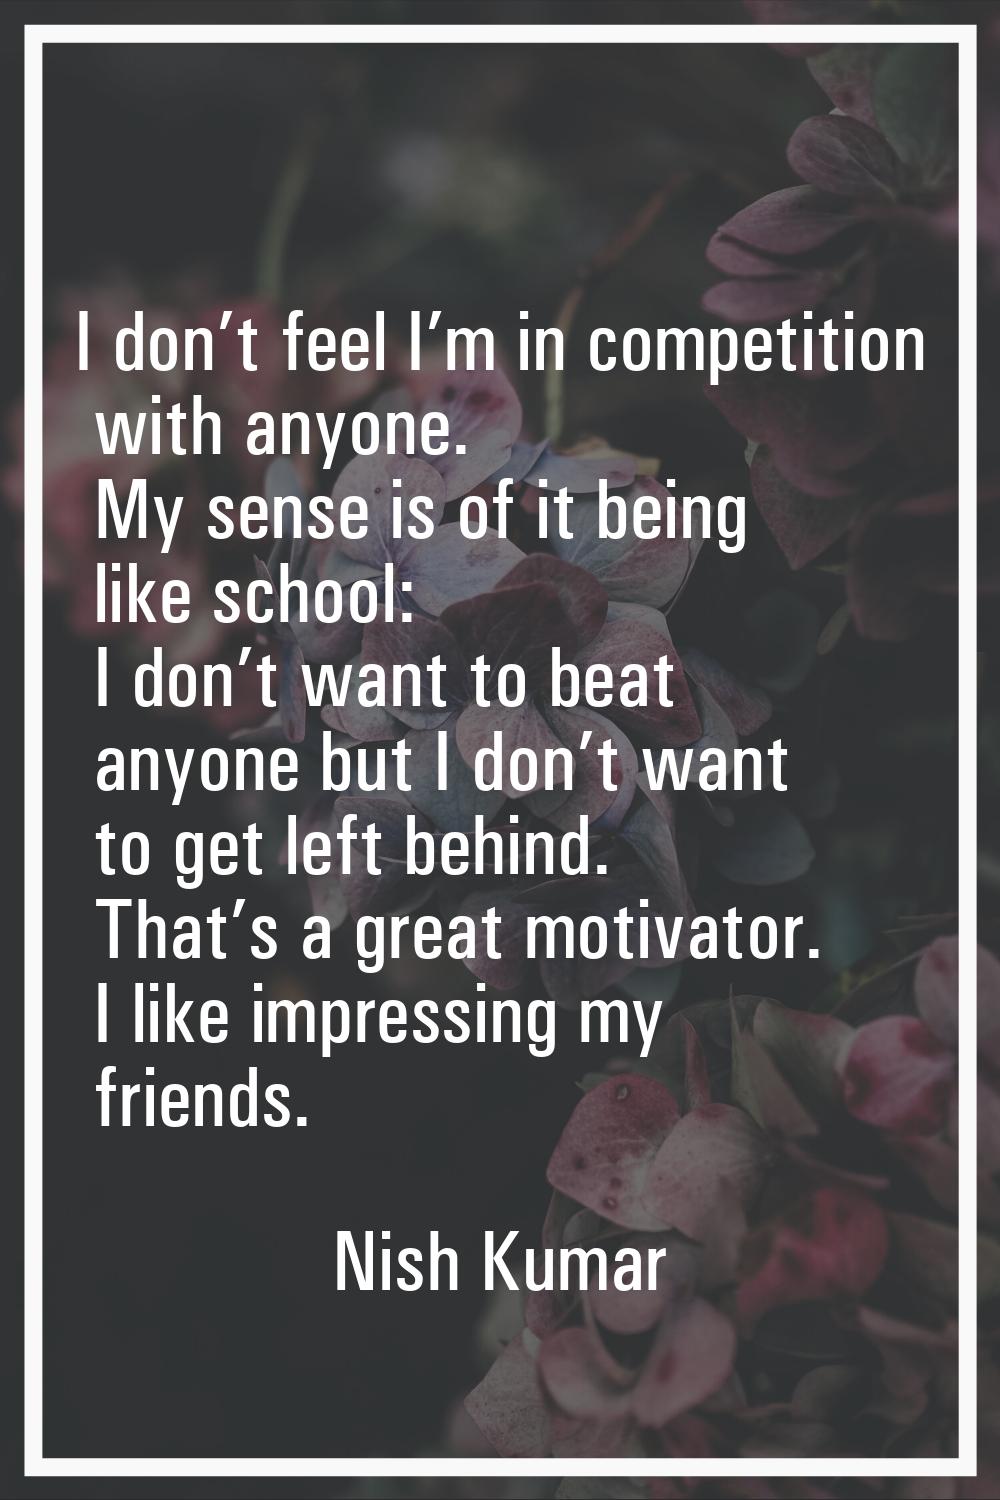 I don’t feel I’m in competition with anyone. My sense is of it being like school: I don’t want to b